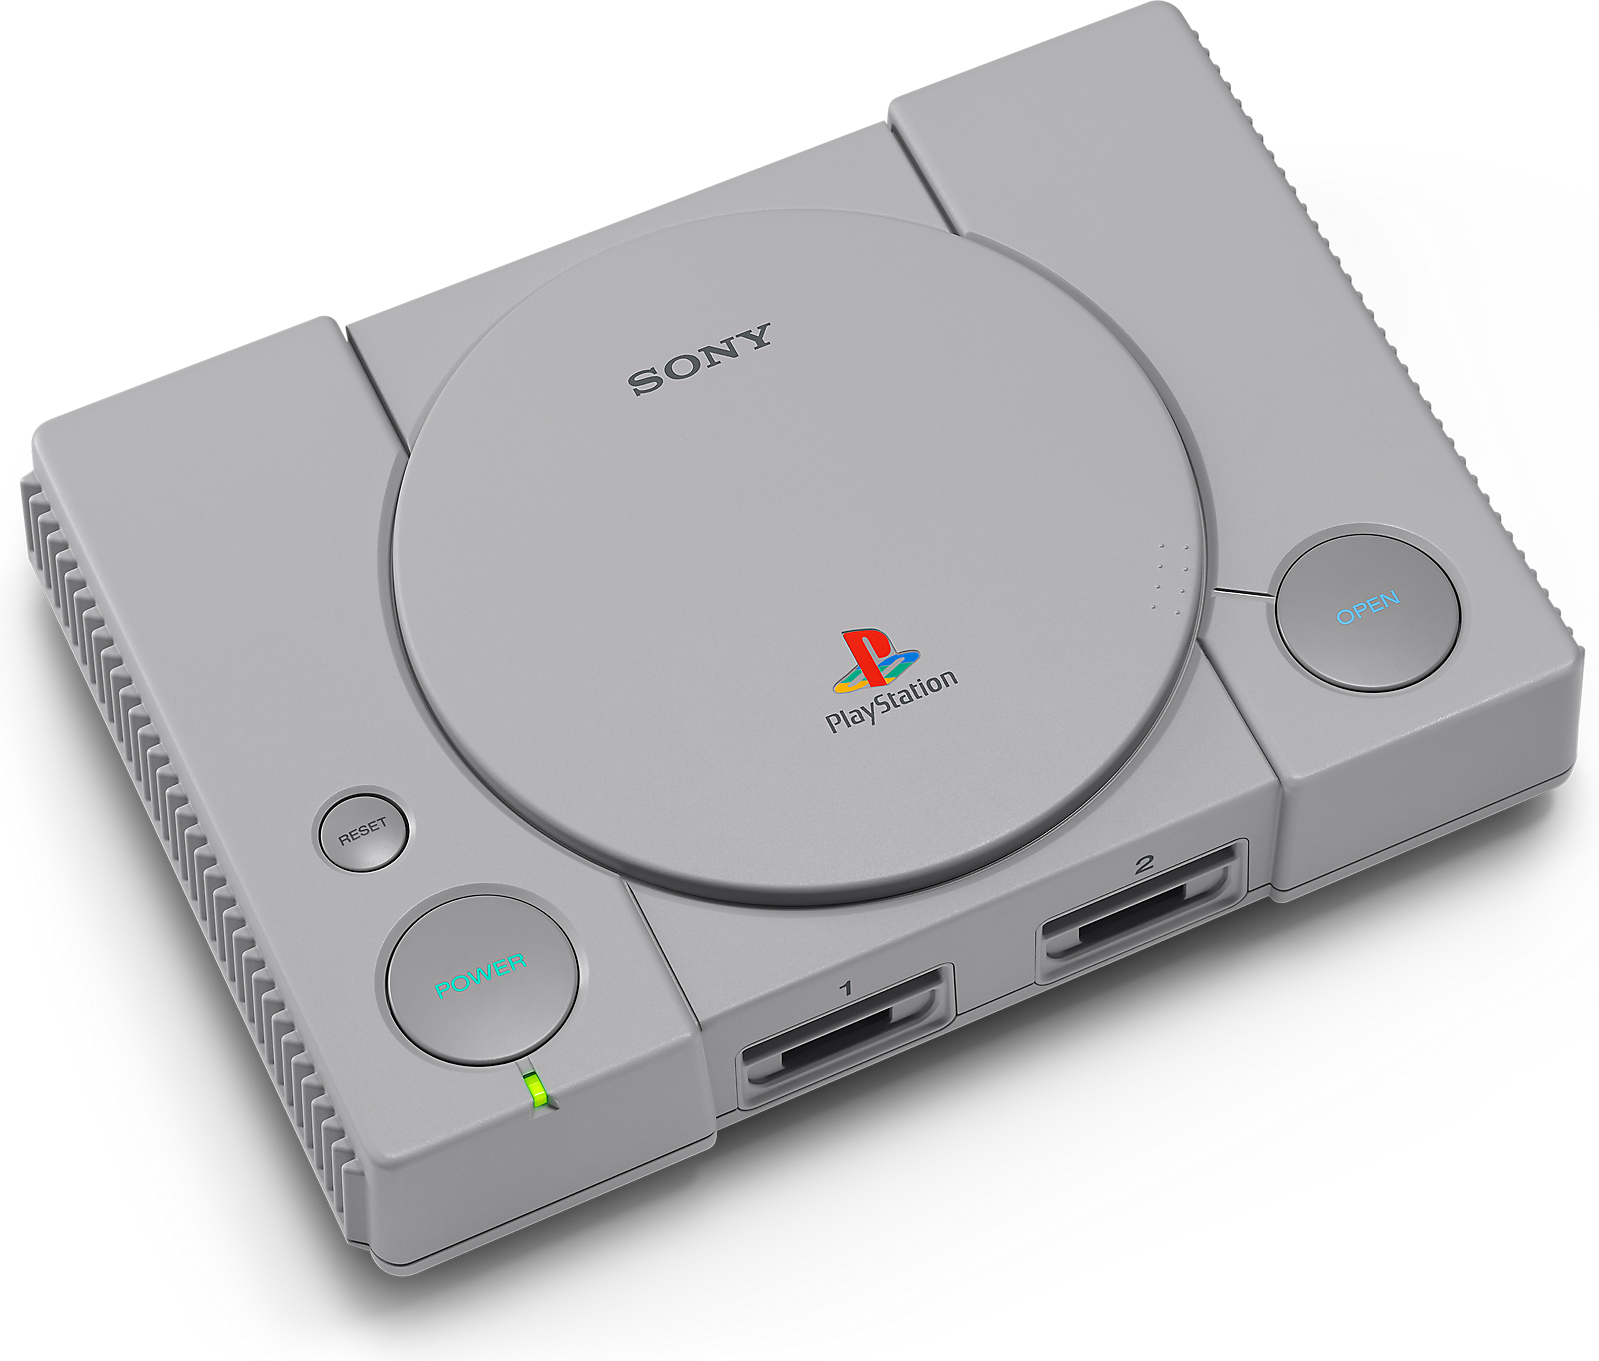 playstation-classic-system-angle.png?ito